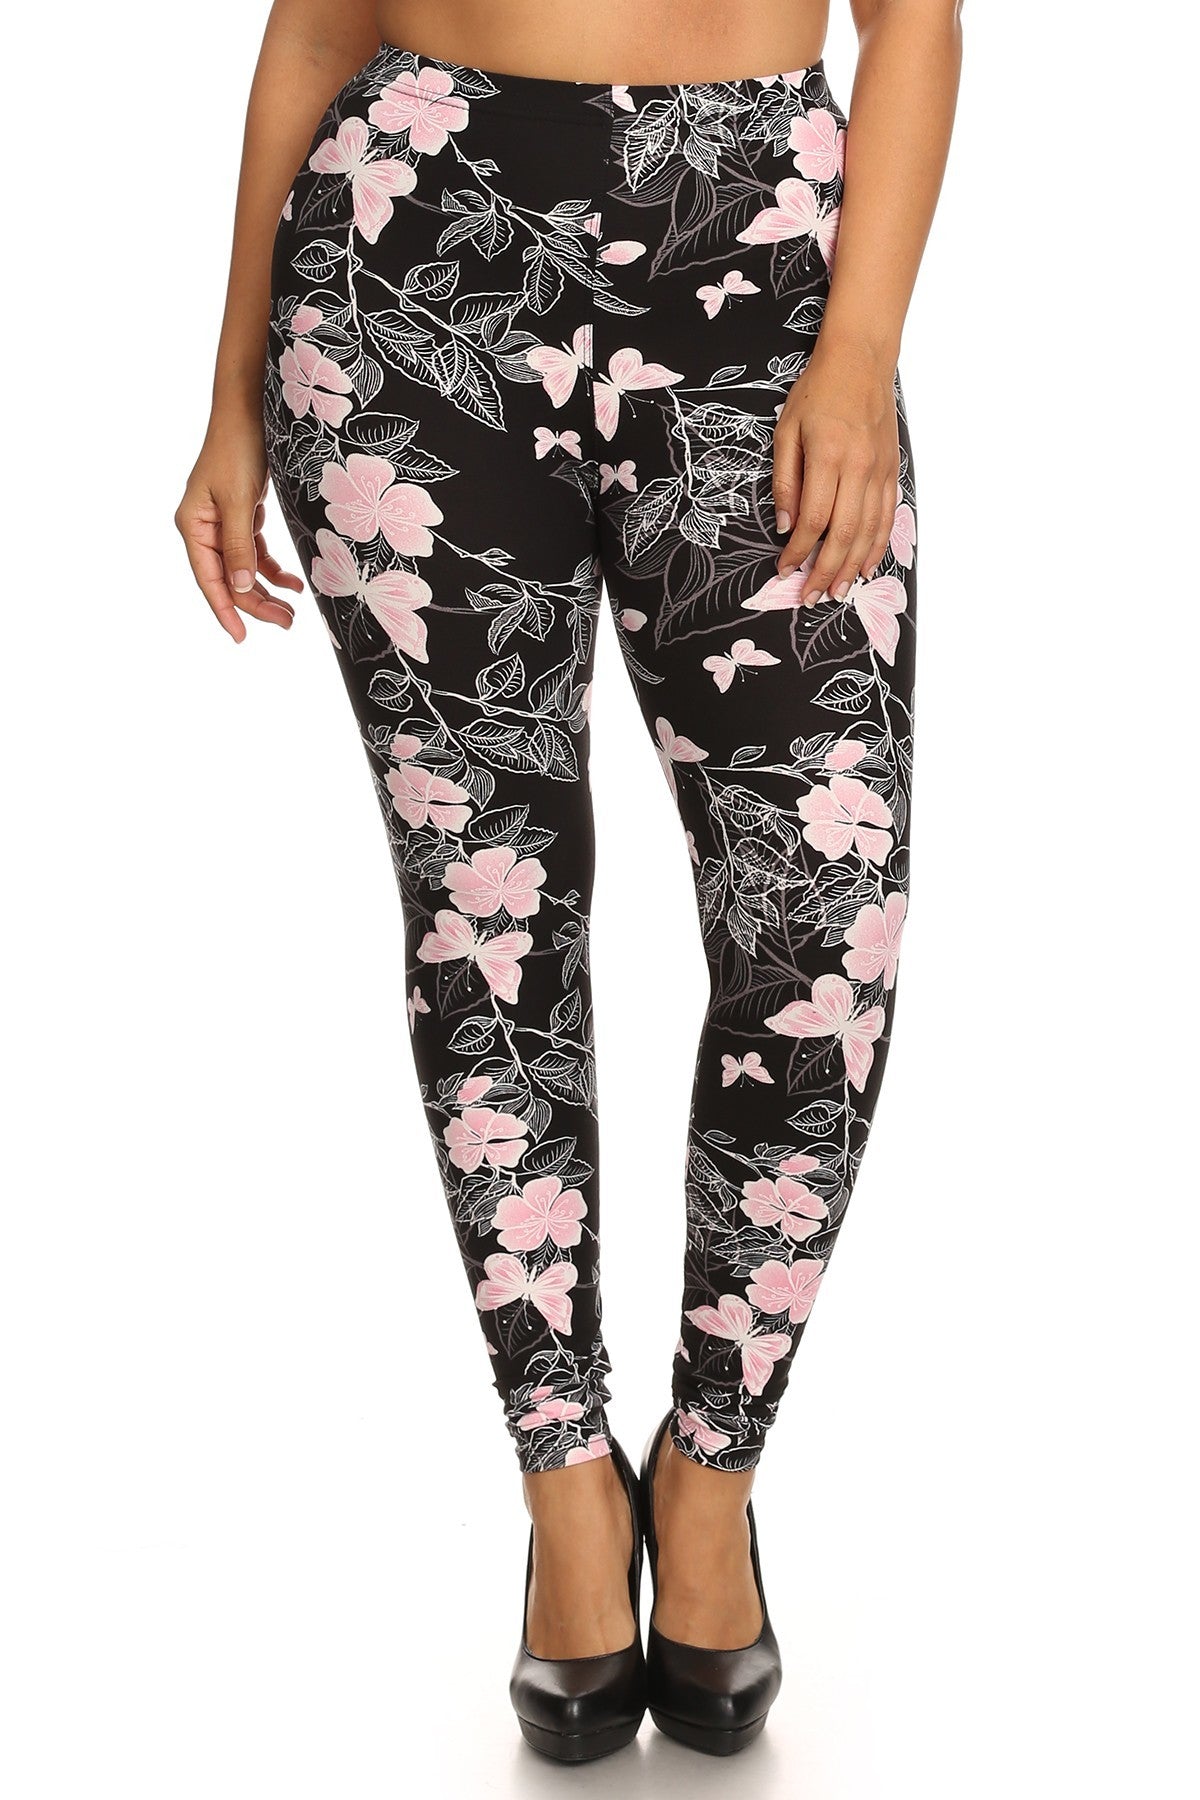 Multi/One Size Fits Most - Plus Size Super Soft Peach Skin Fabric, Butterfly Graphic Printed Knit Legging With Elastic Waist Detail - womens leggings at TFC&H Co.